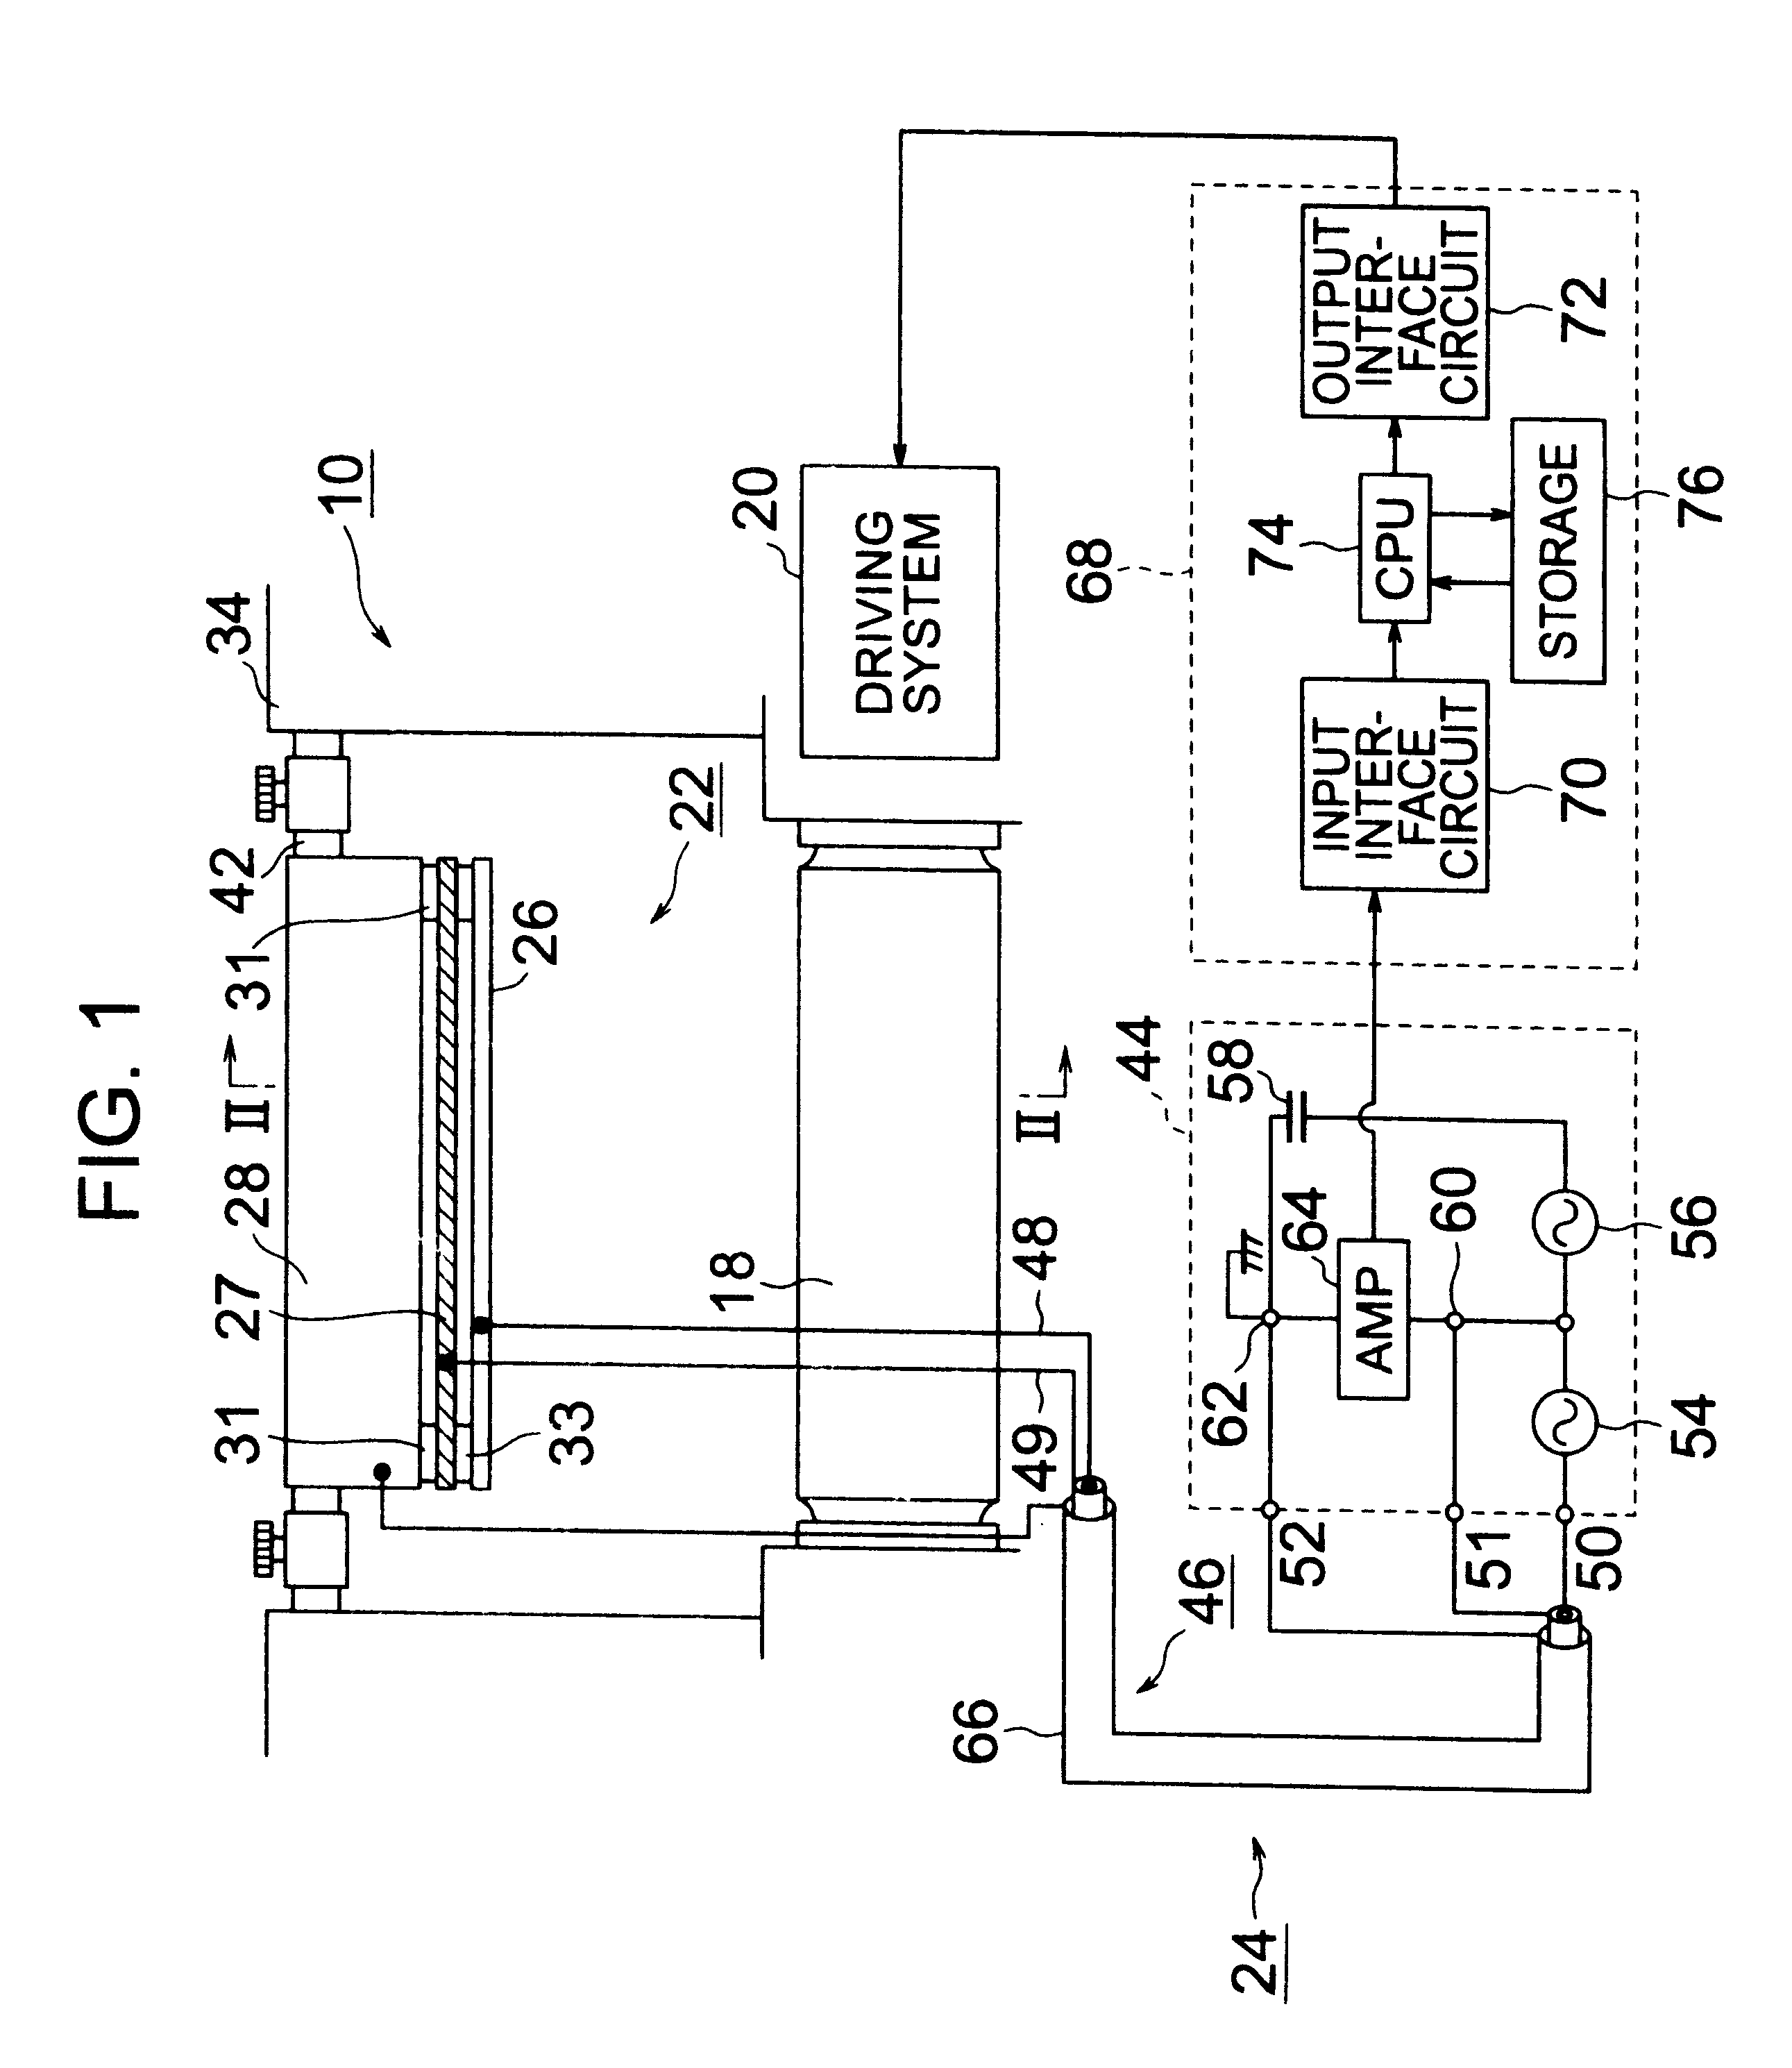 Sensor apparatus and safety apparatus for protecting approach to machines